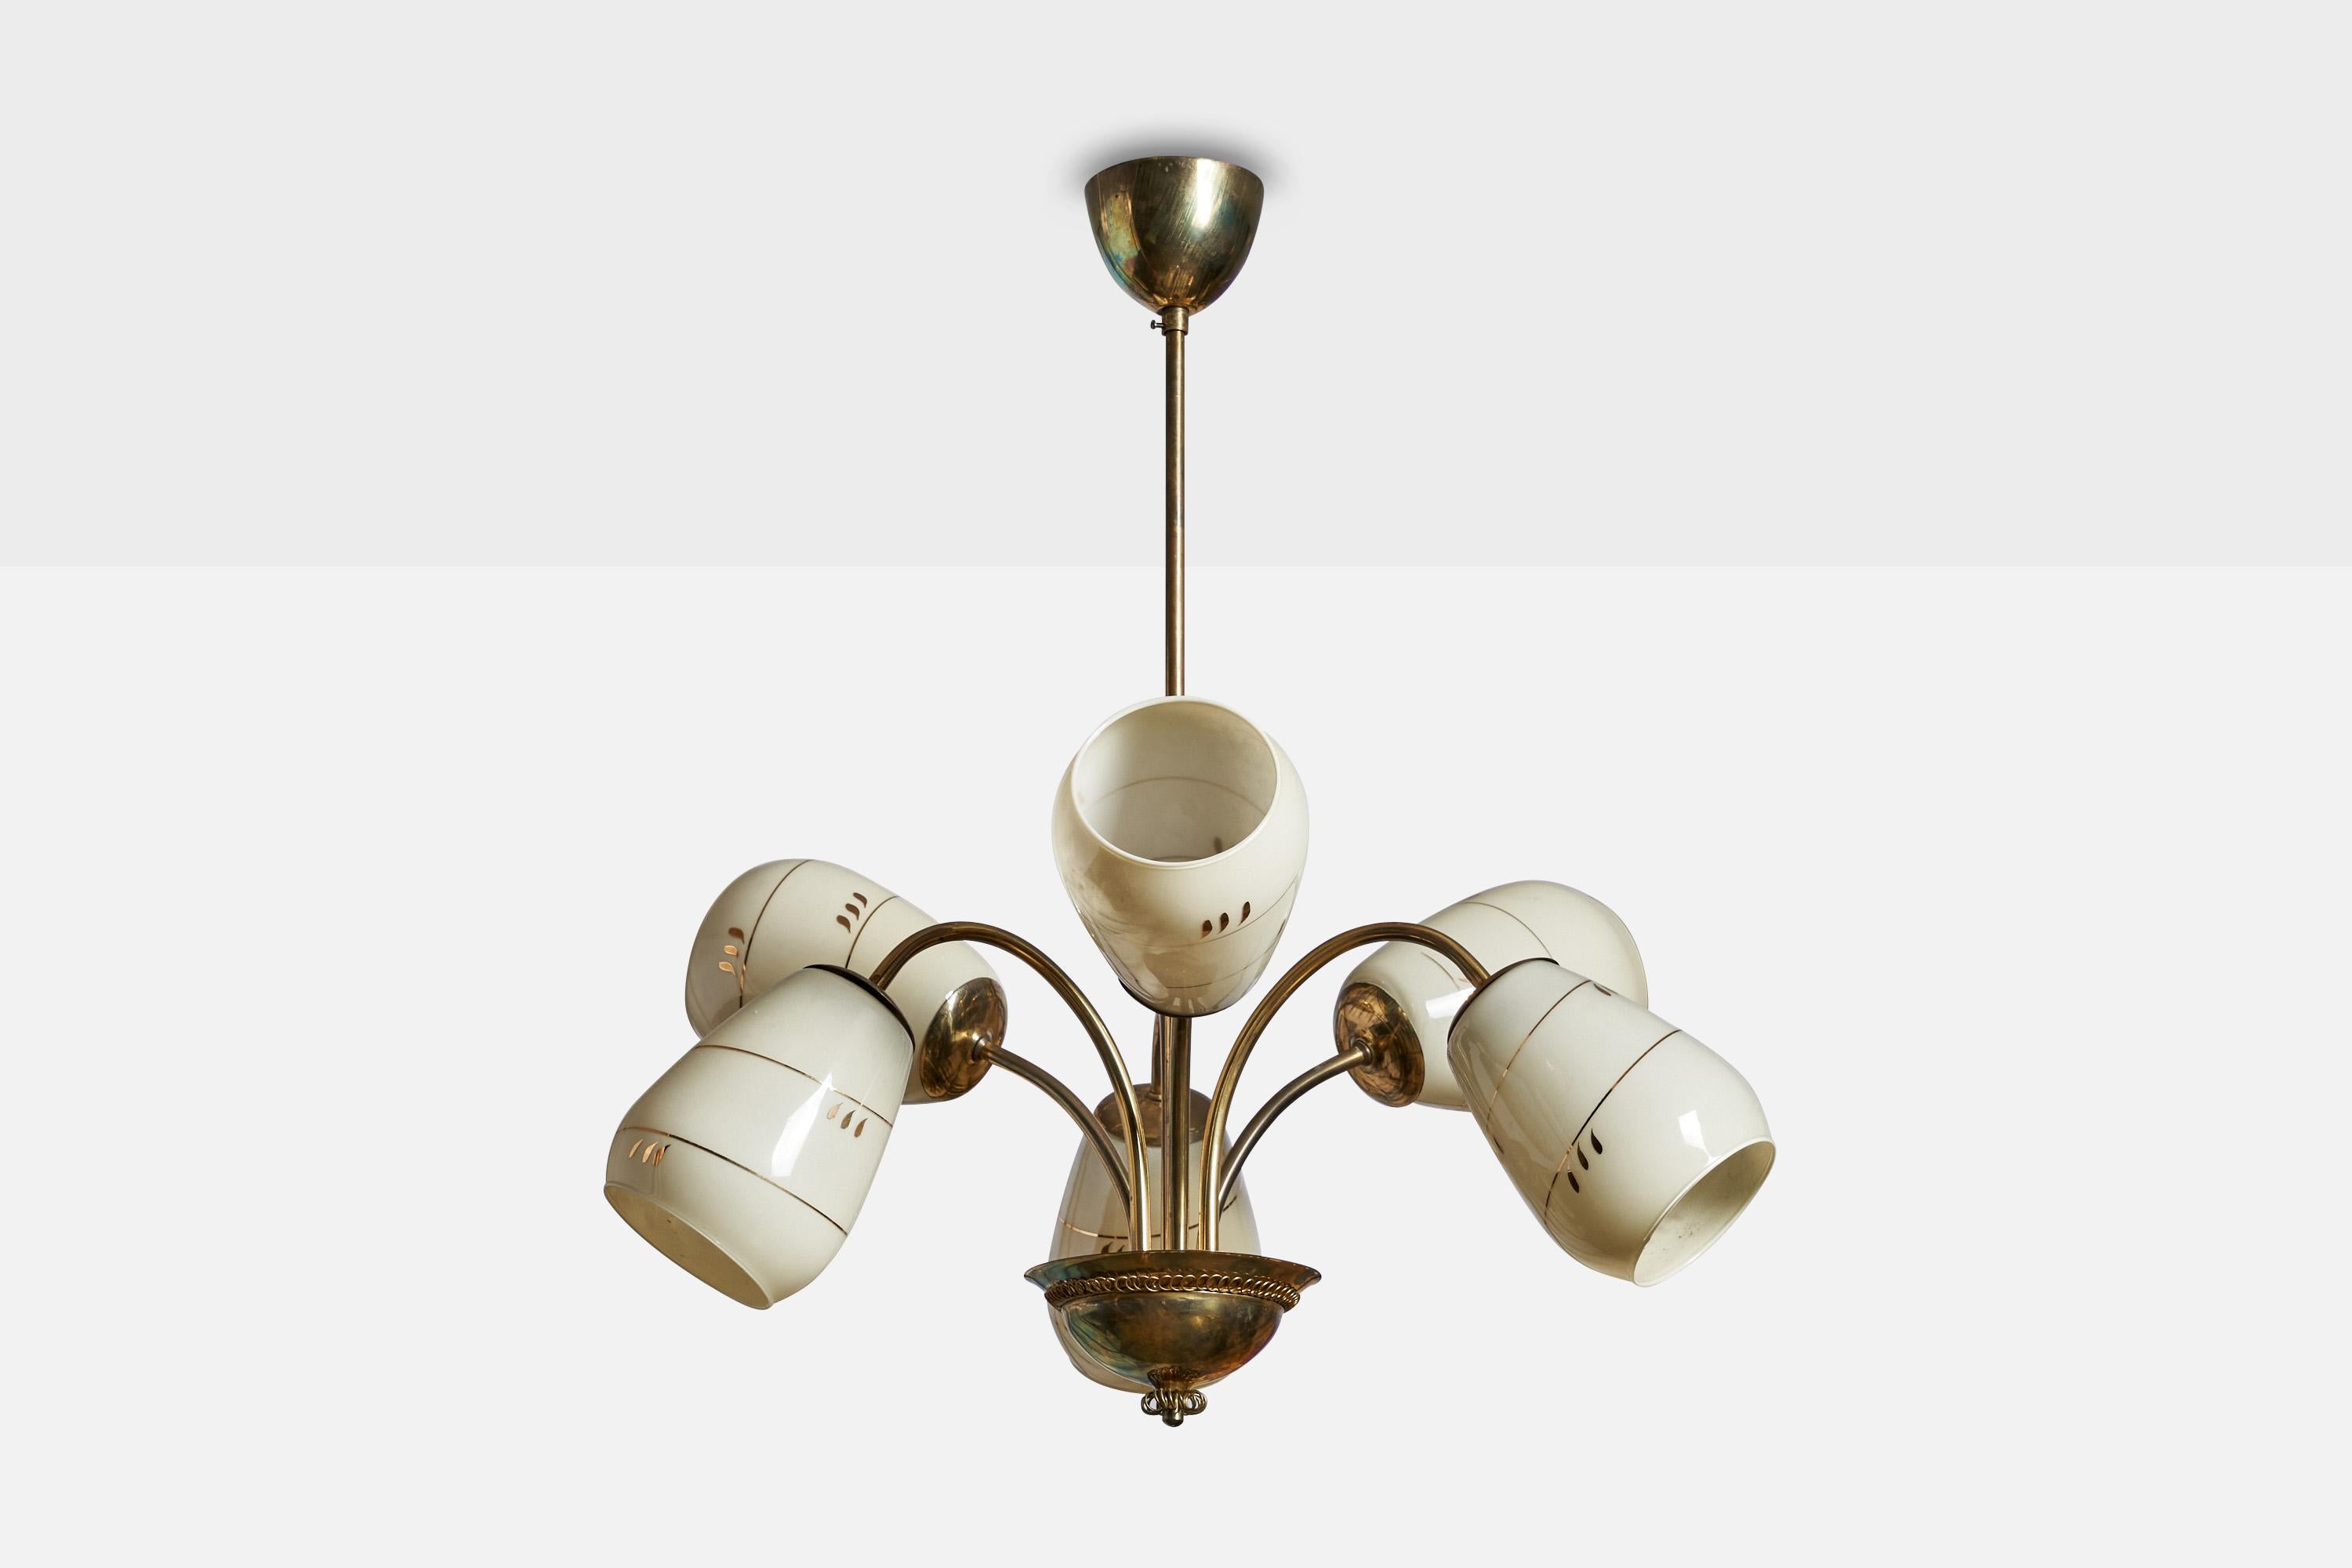 A brass and gilded opaline glass chandelier designed and produced in Finland, 1940s.

Dimensions of canopy (inches): 2.5”  H x 3.5”  Diameter
Socket takes standard E-26 bulbs. 6 sockets.There is no maximum wattage stated on the fixture. All lighting